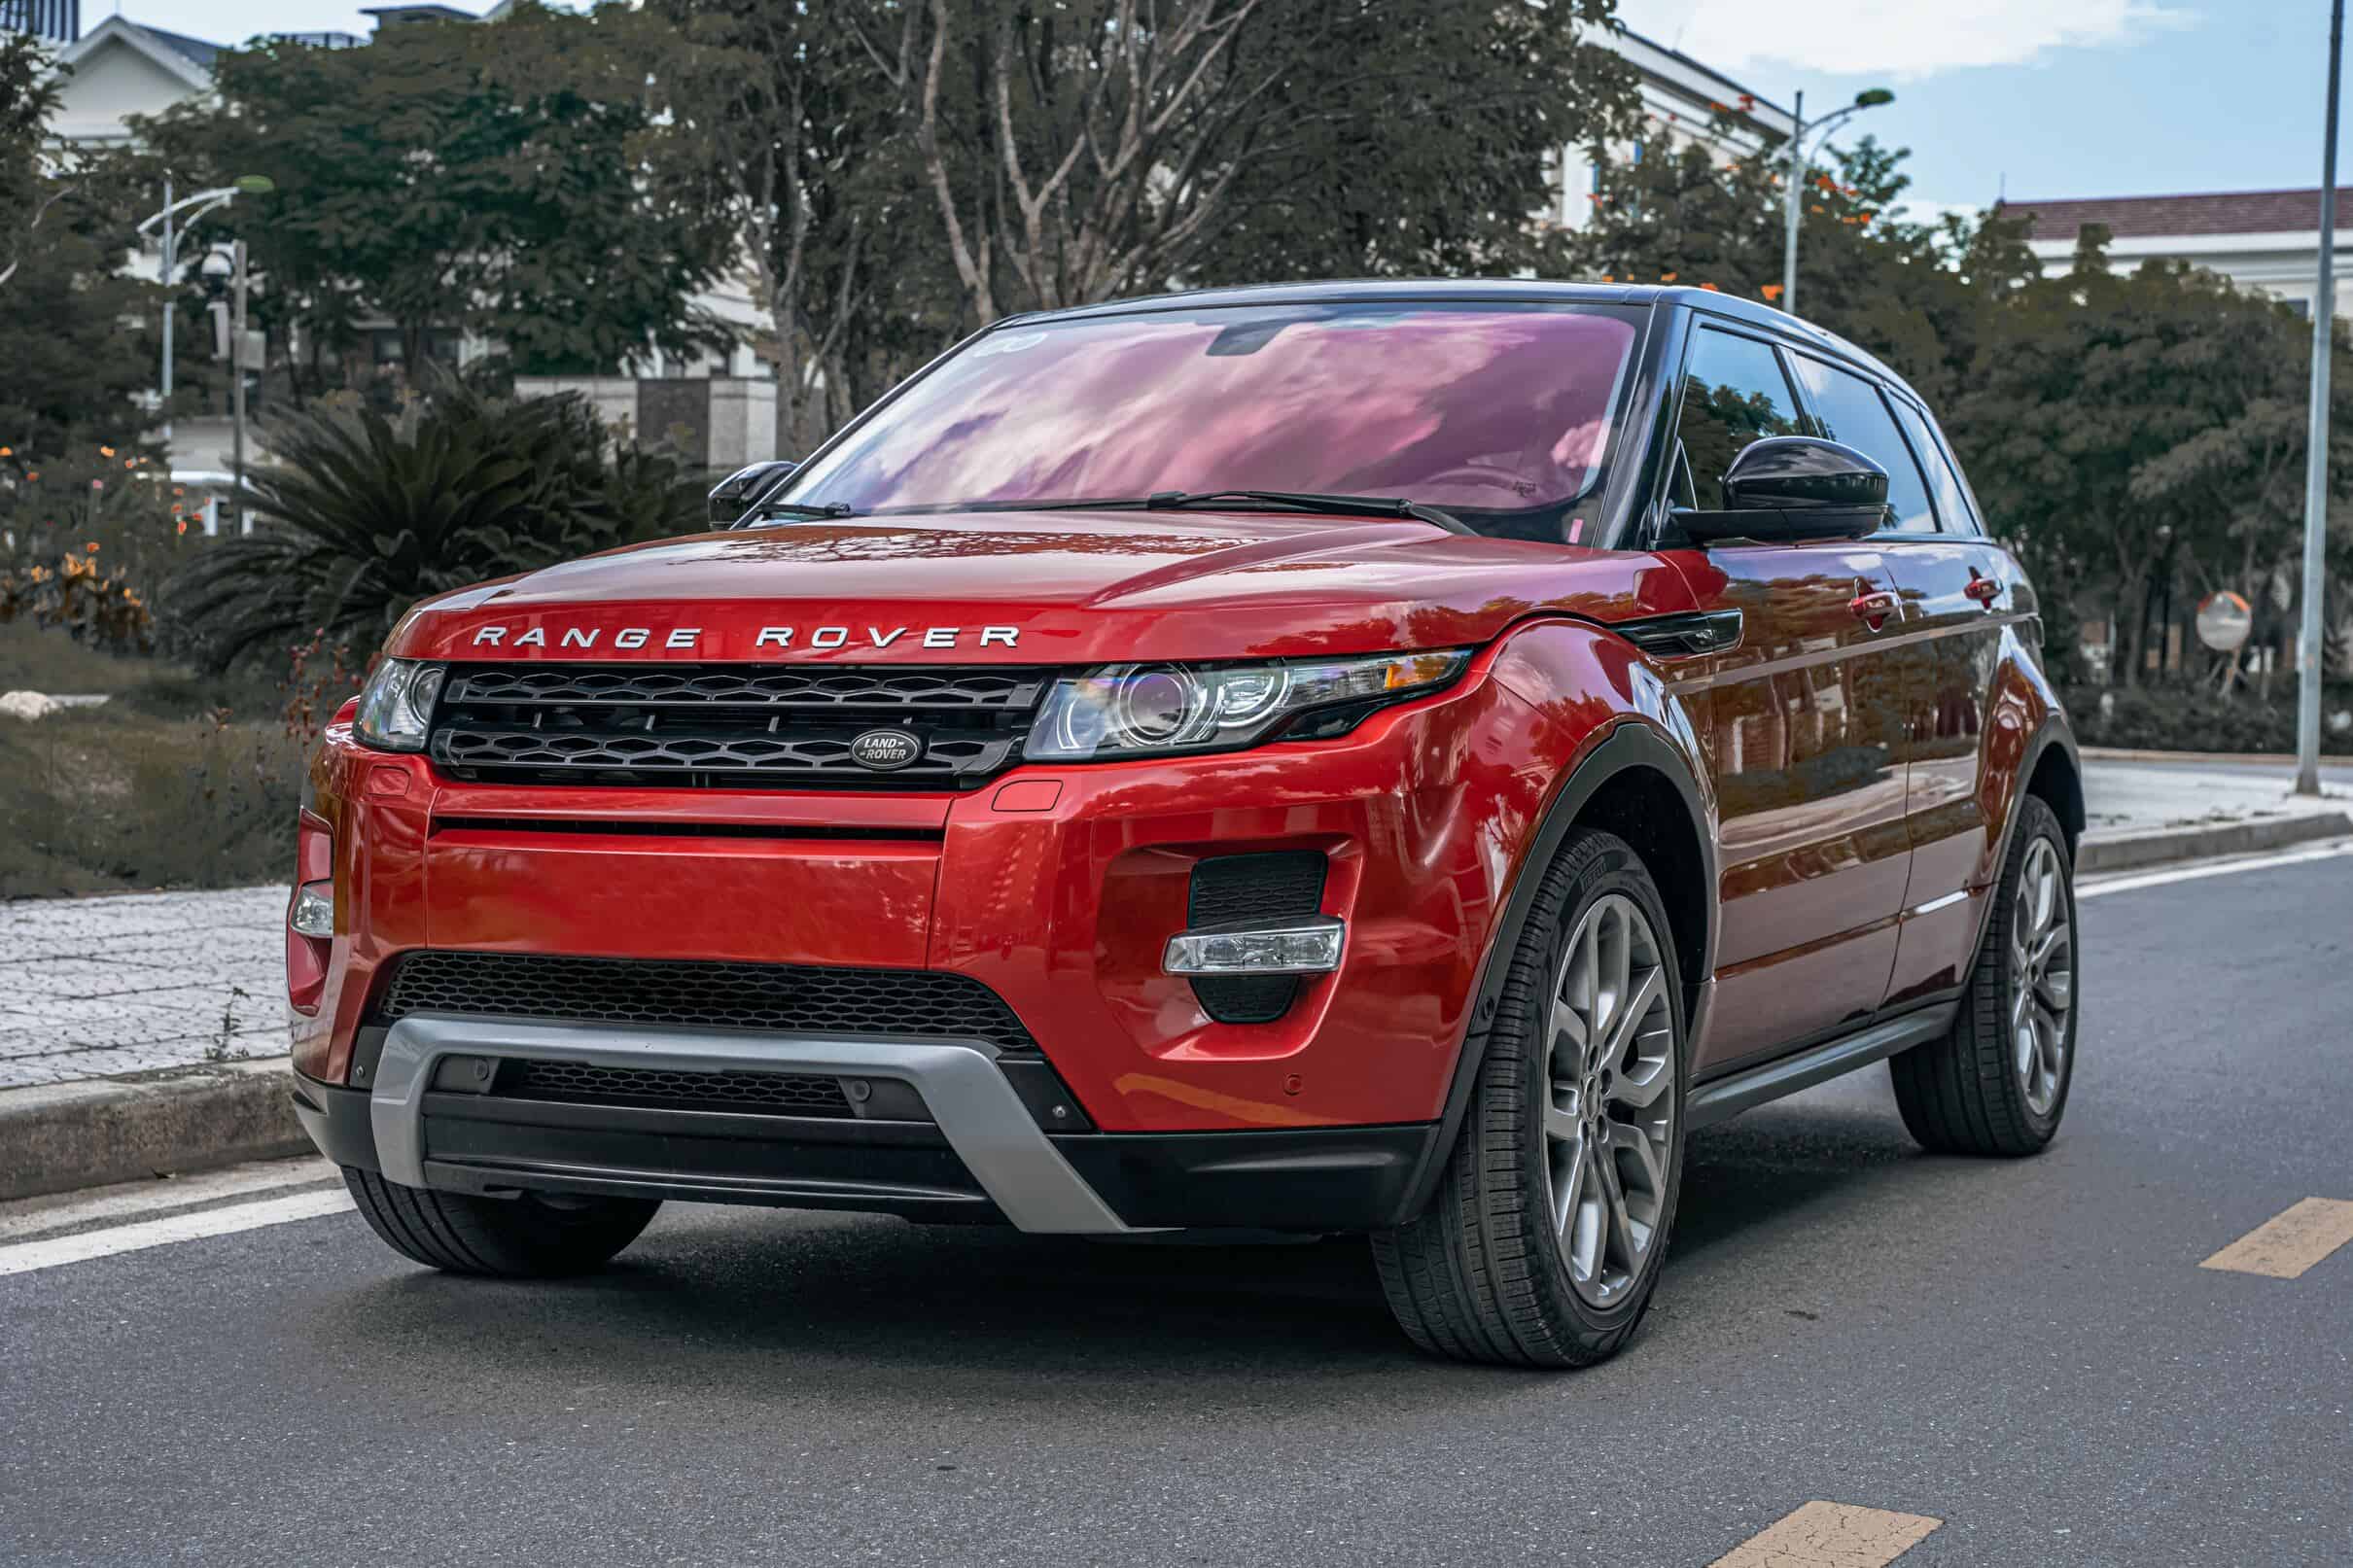 Red Range Rover Evoque - Luxury Compact SUV in Striking Red